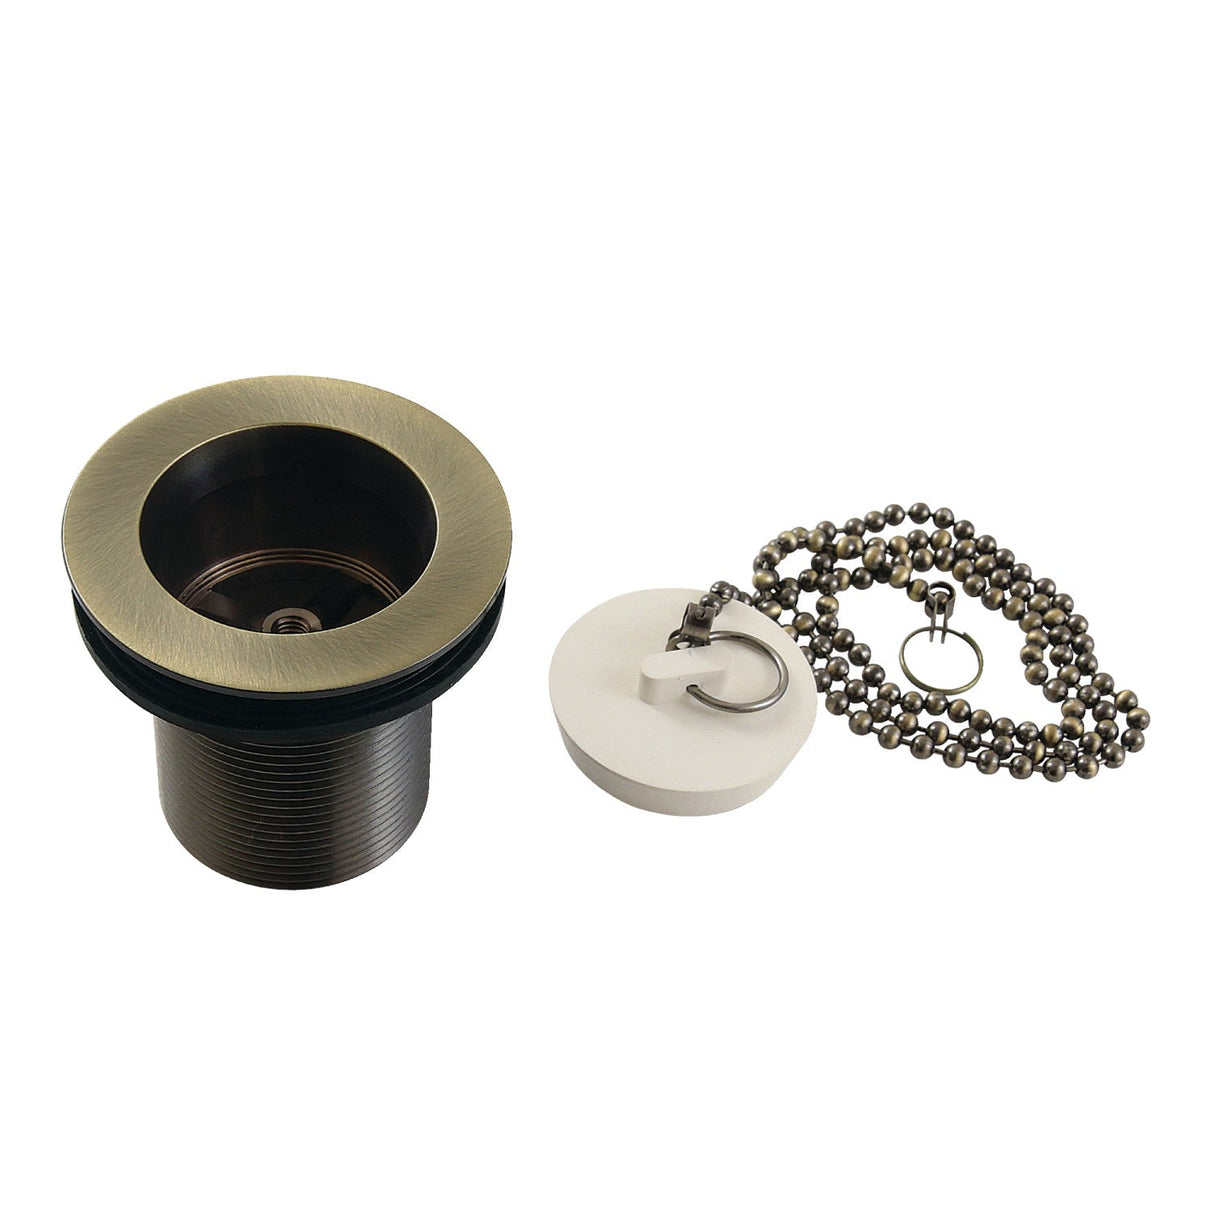 Made To Match DSP20AB 1-1/2-Inch Chain and Stopper Tub Drain with 2-Inch Body Thread, Antique Brass